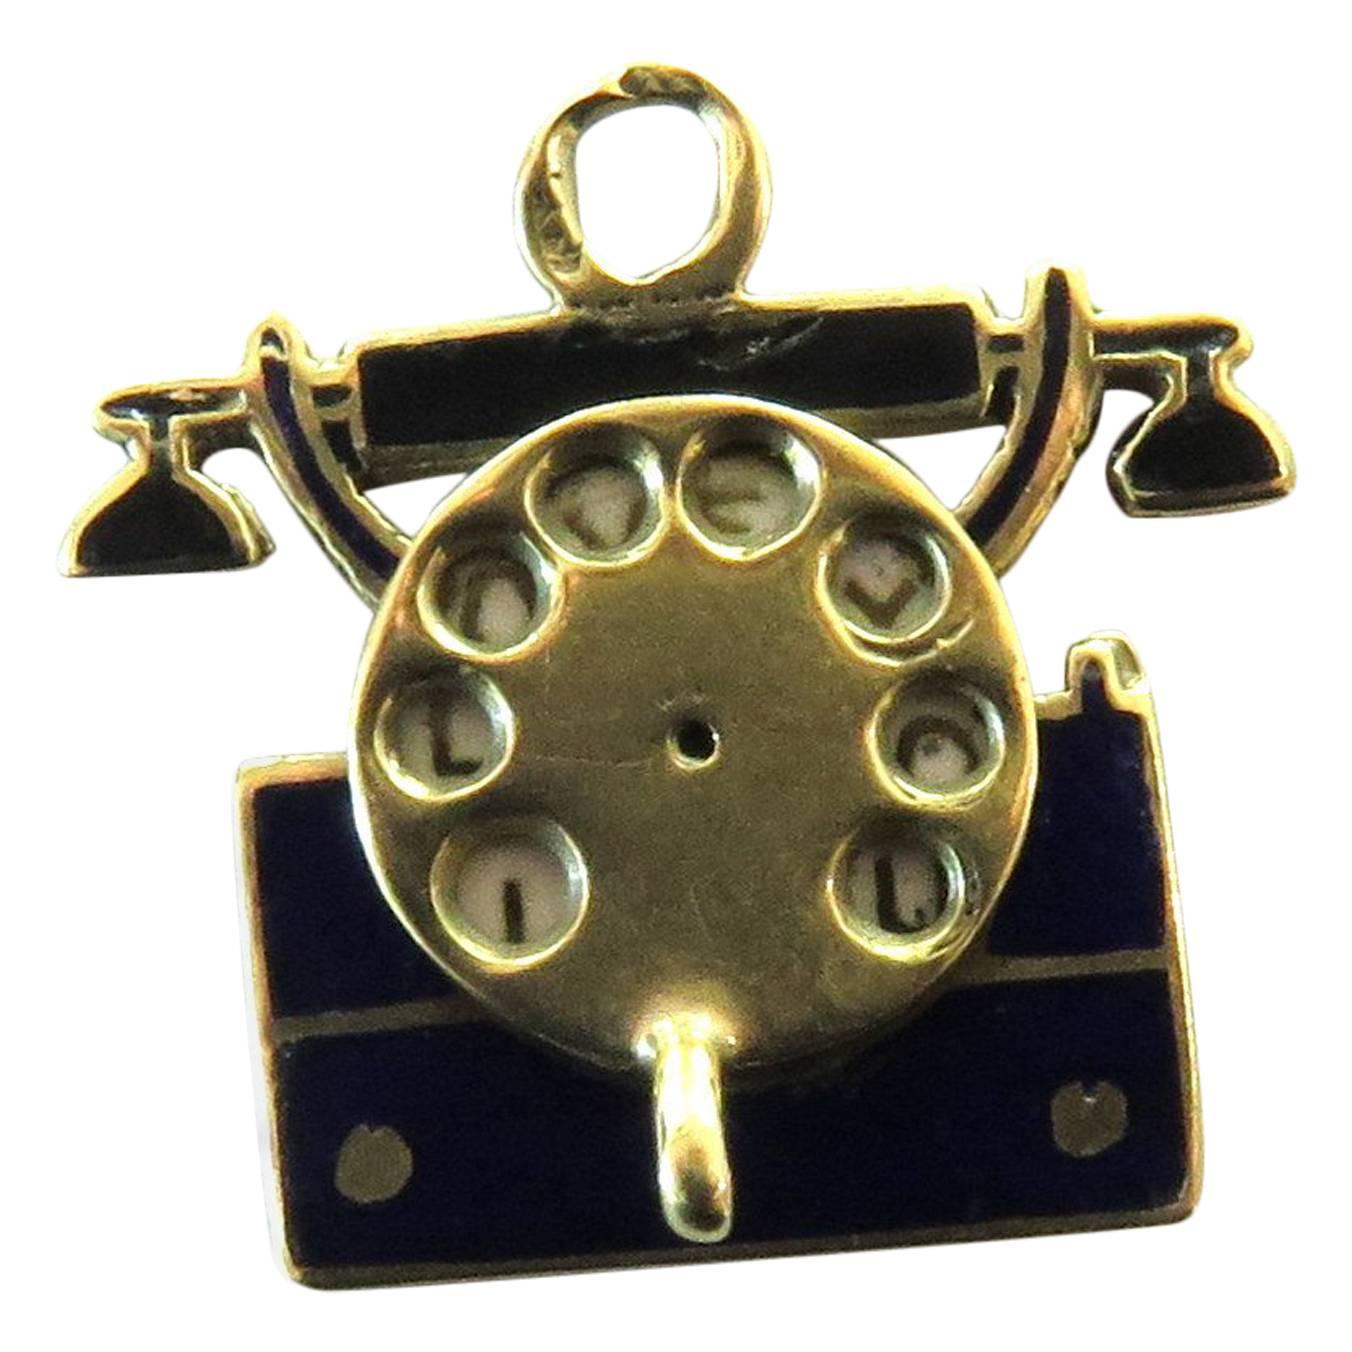 Rare Art Deco Enamel Movable Telephone Gold Charm Dated 1937 For Sale